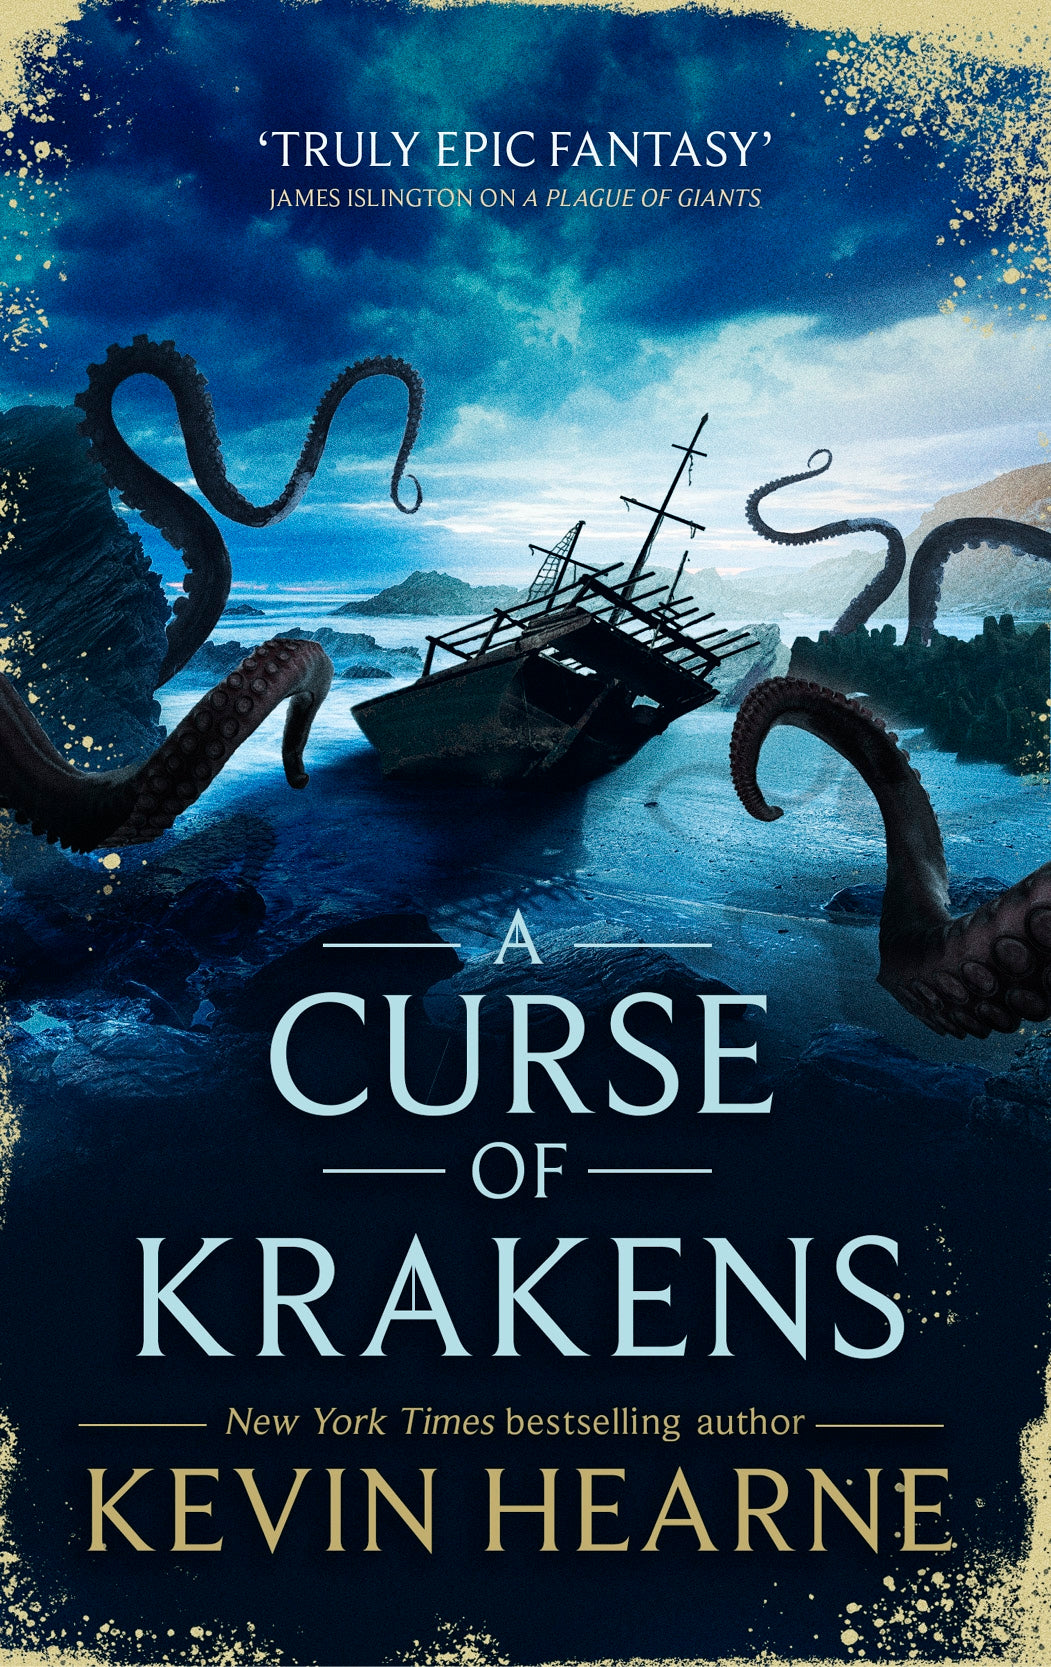 A Curse of Krakens by Kevin Hearne